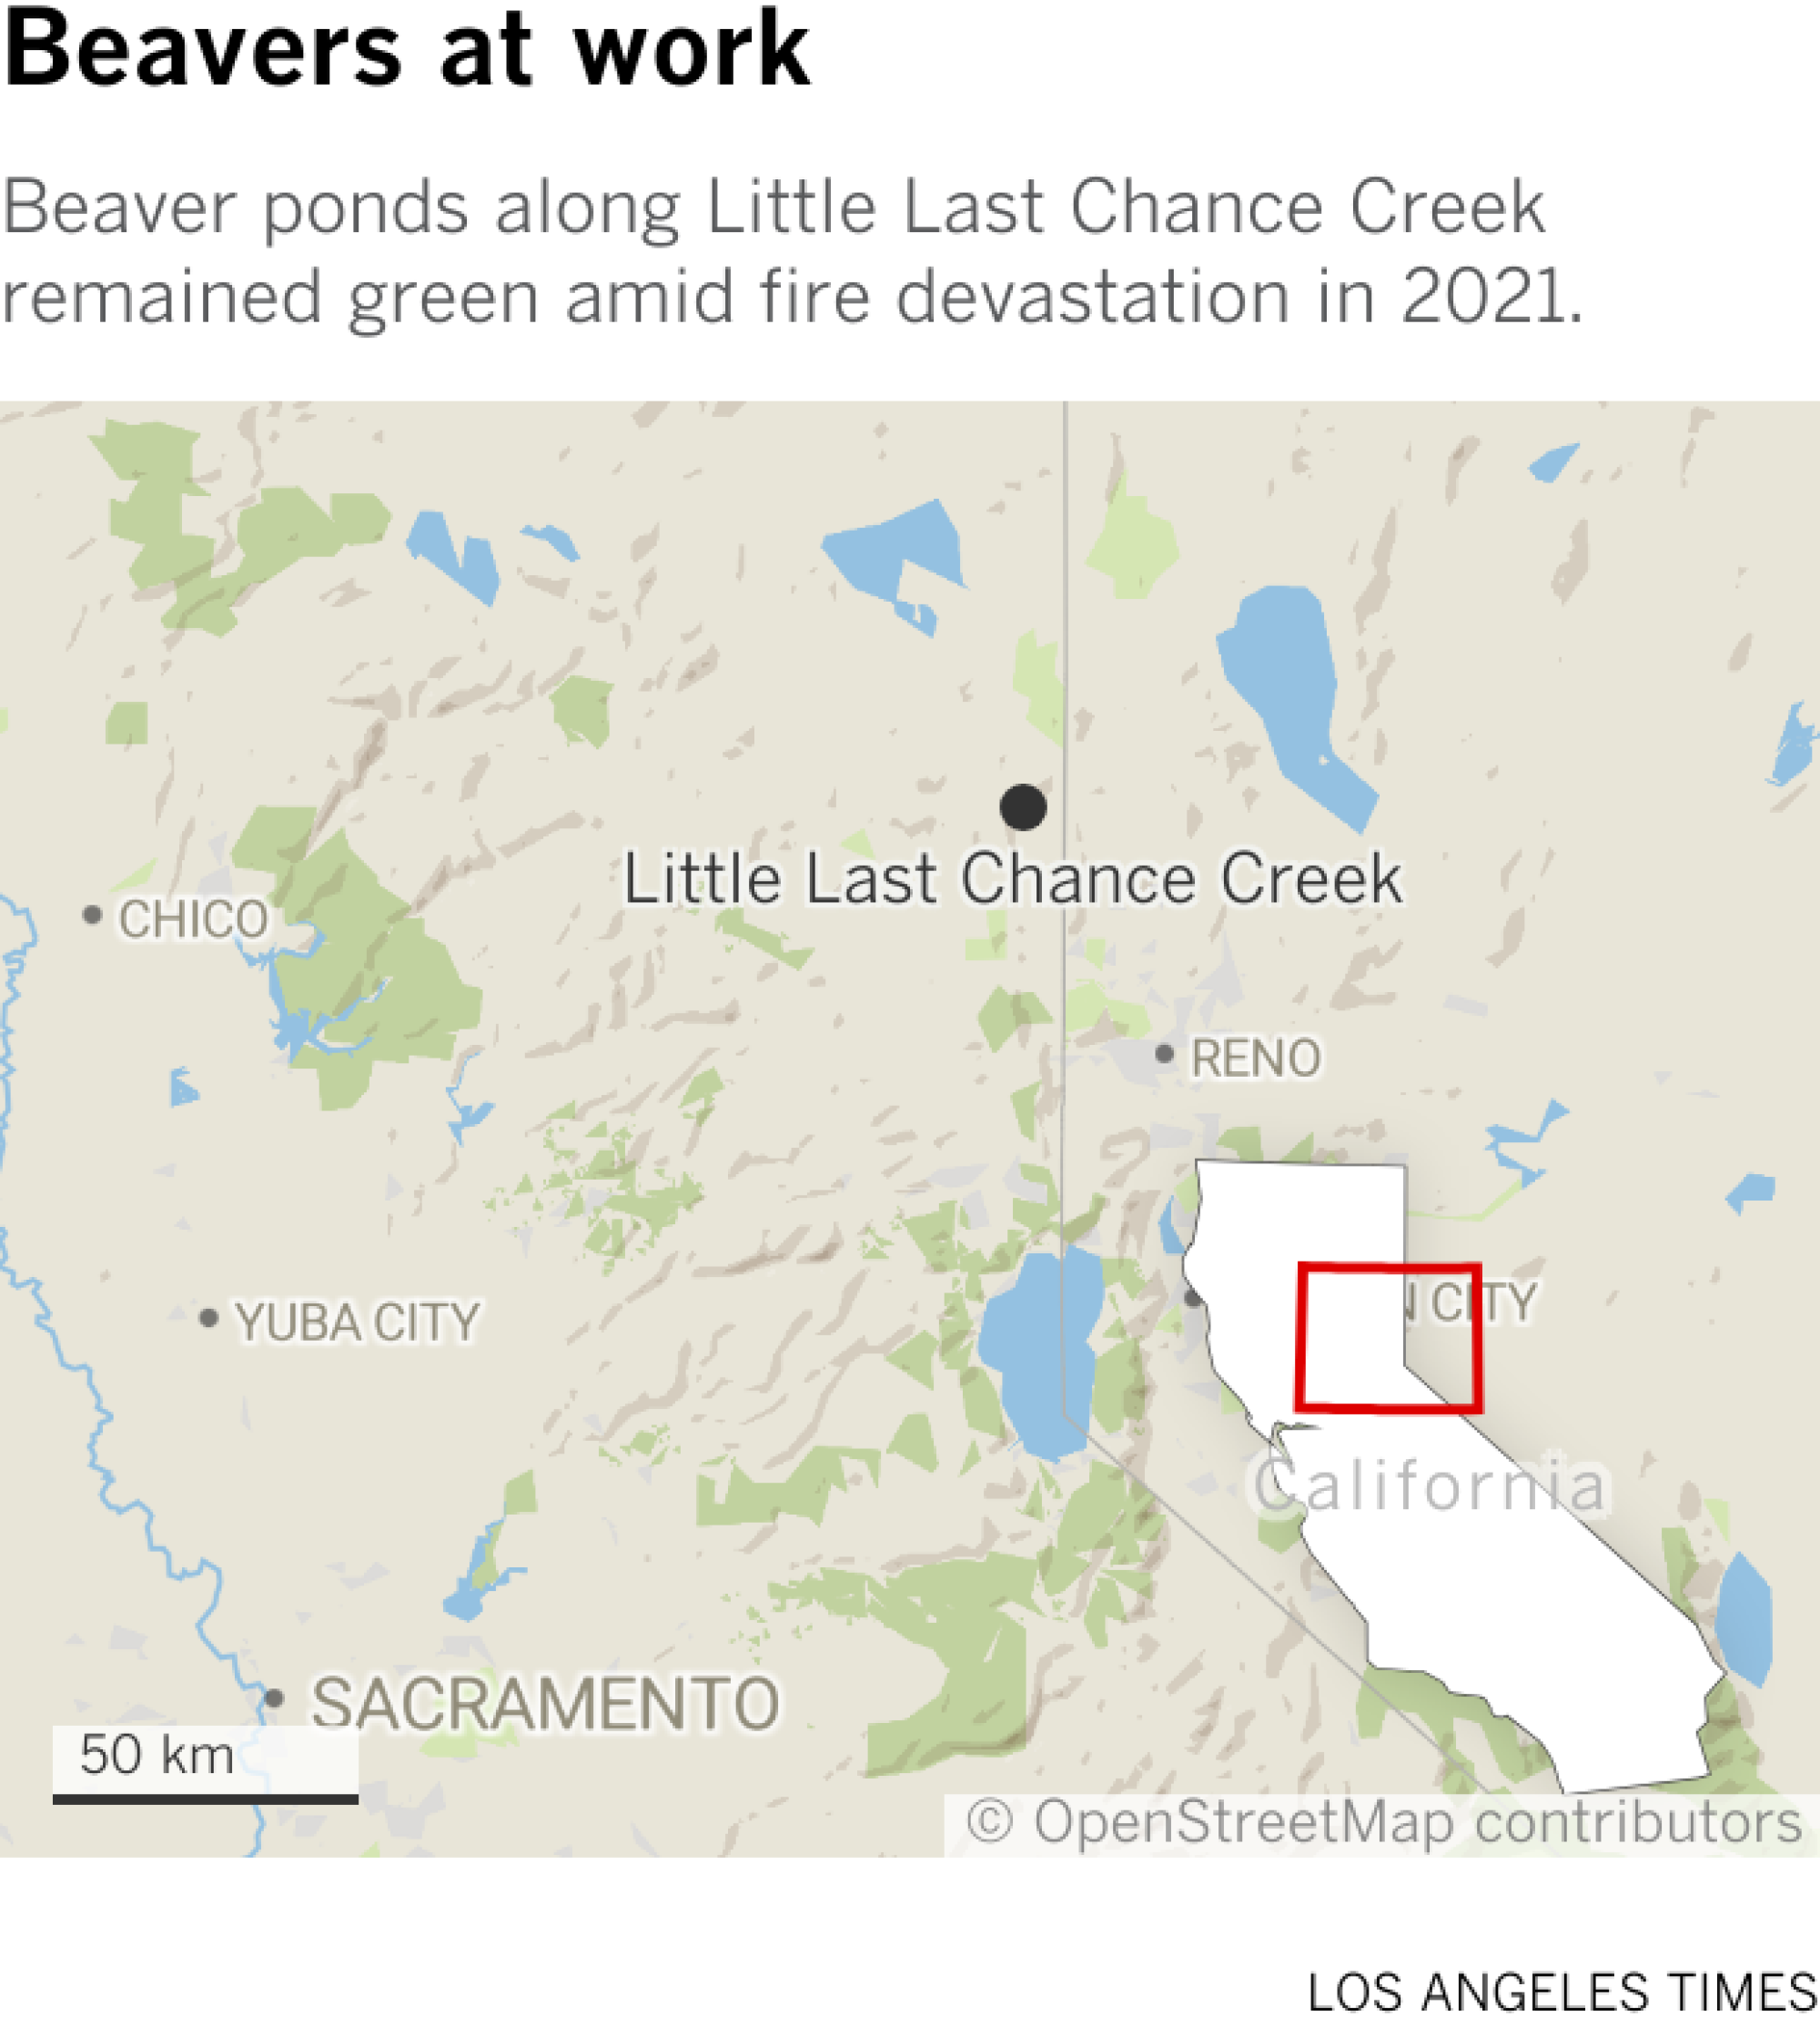 Map locates Little Last Chance Creek in Northern California.